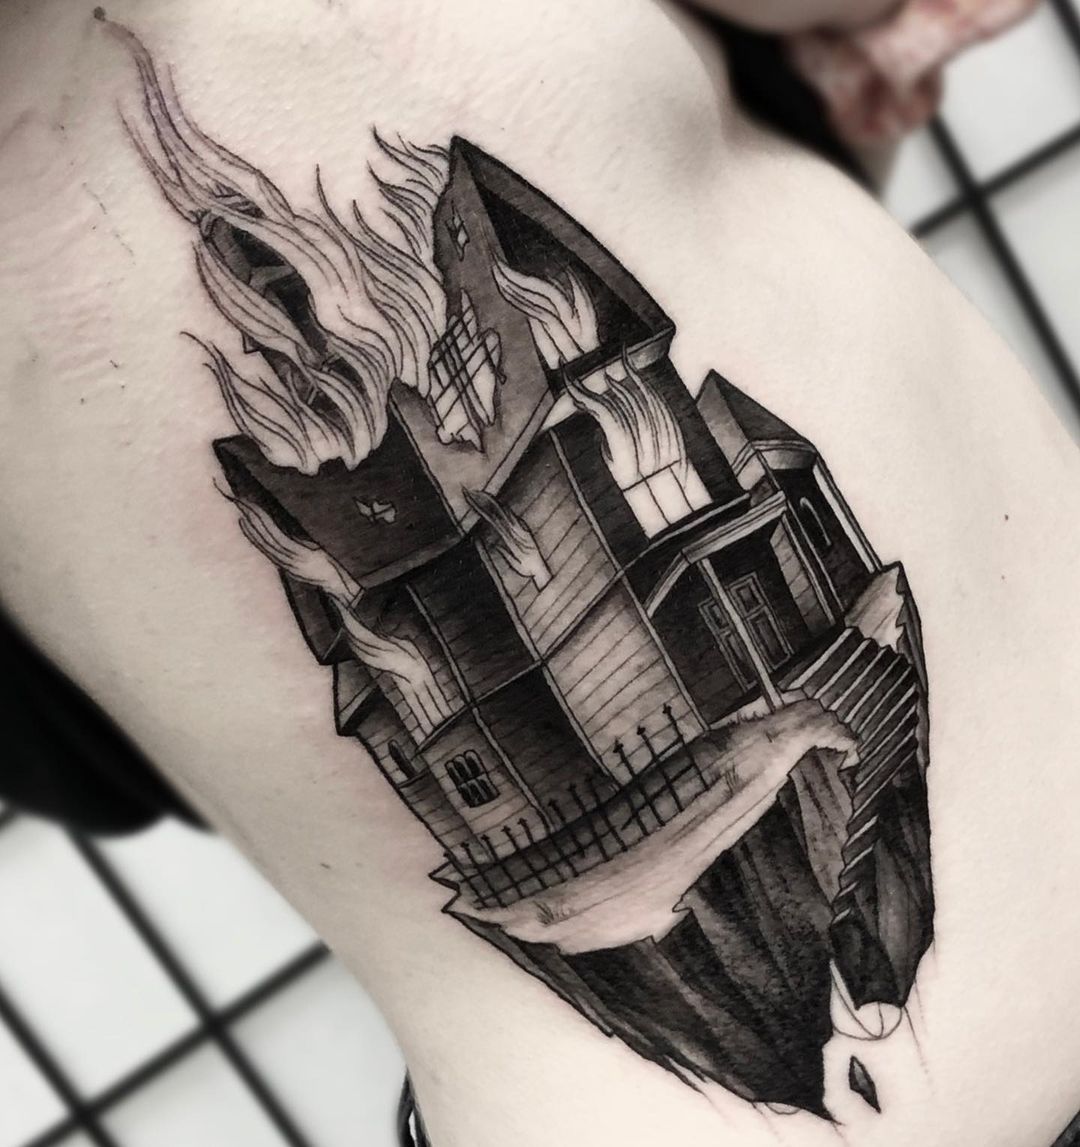 Tattoo made by Otysz at INKsearch